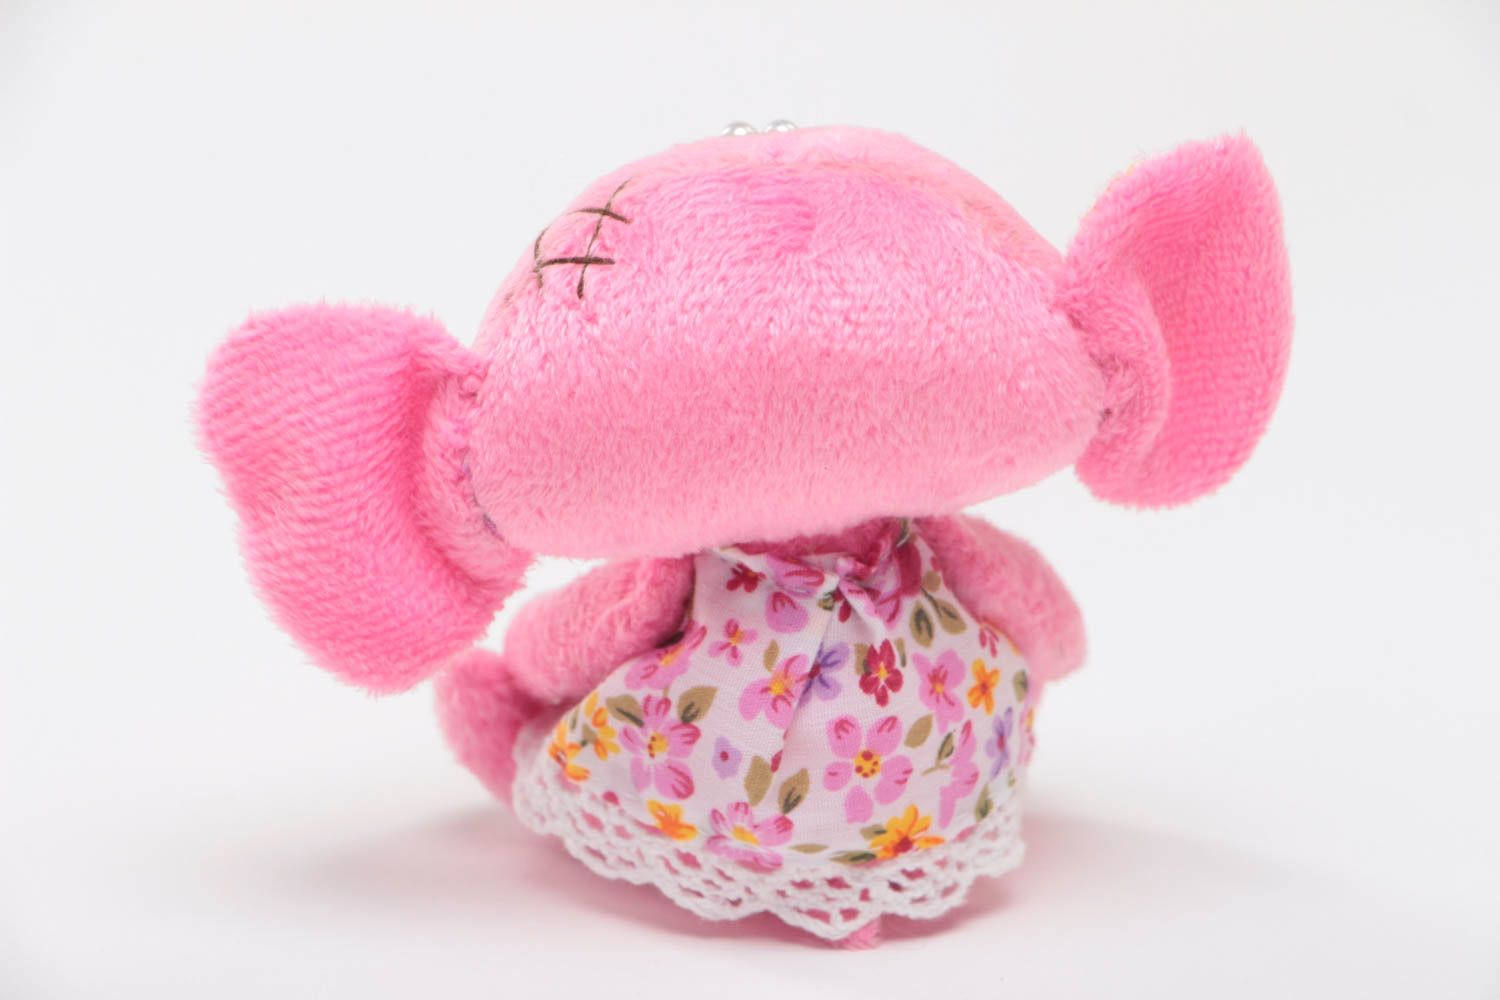 Handmade small vintage soft toy sewn of plush pink elephant with floral ears photo 4